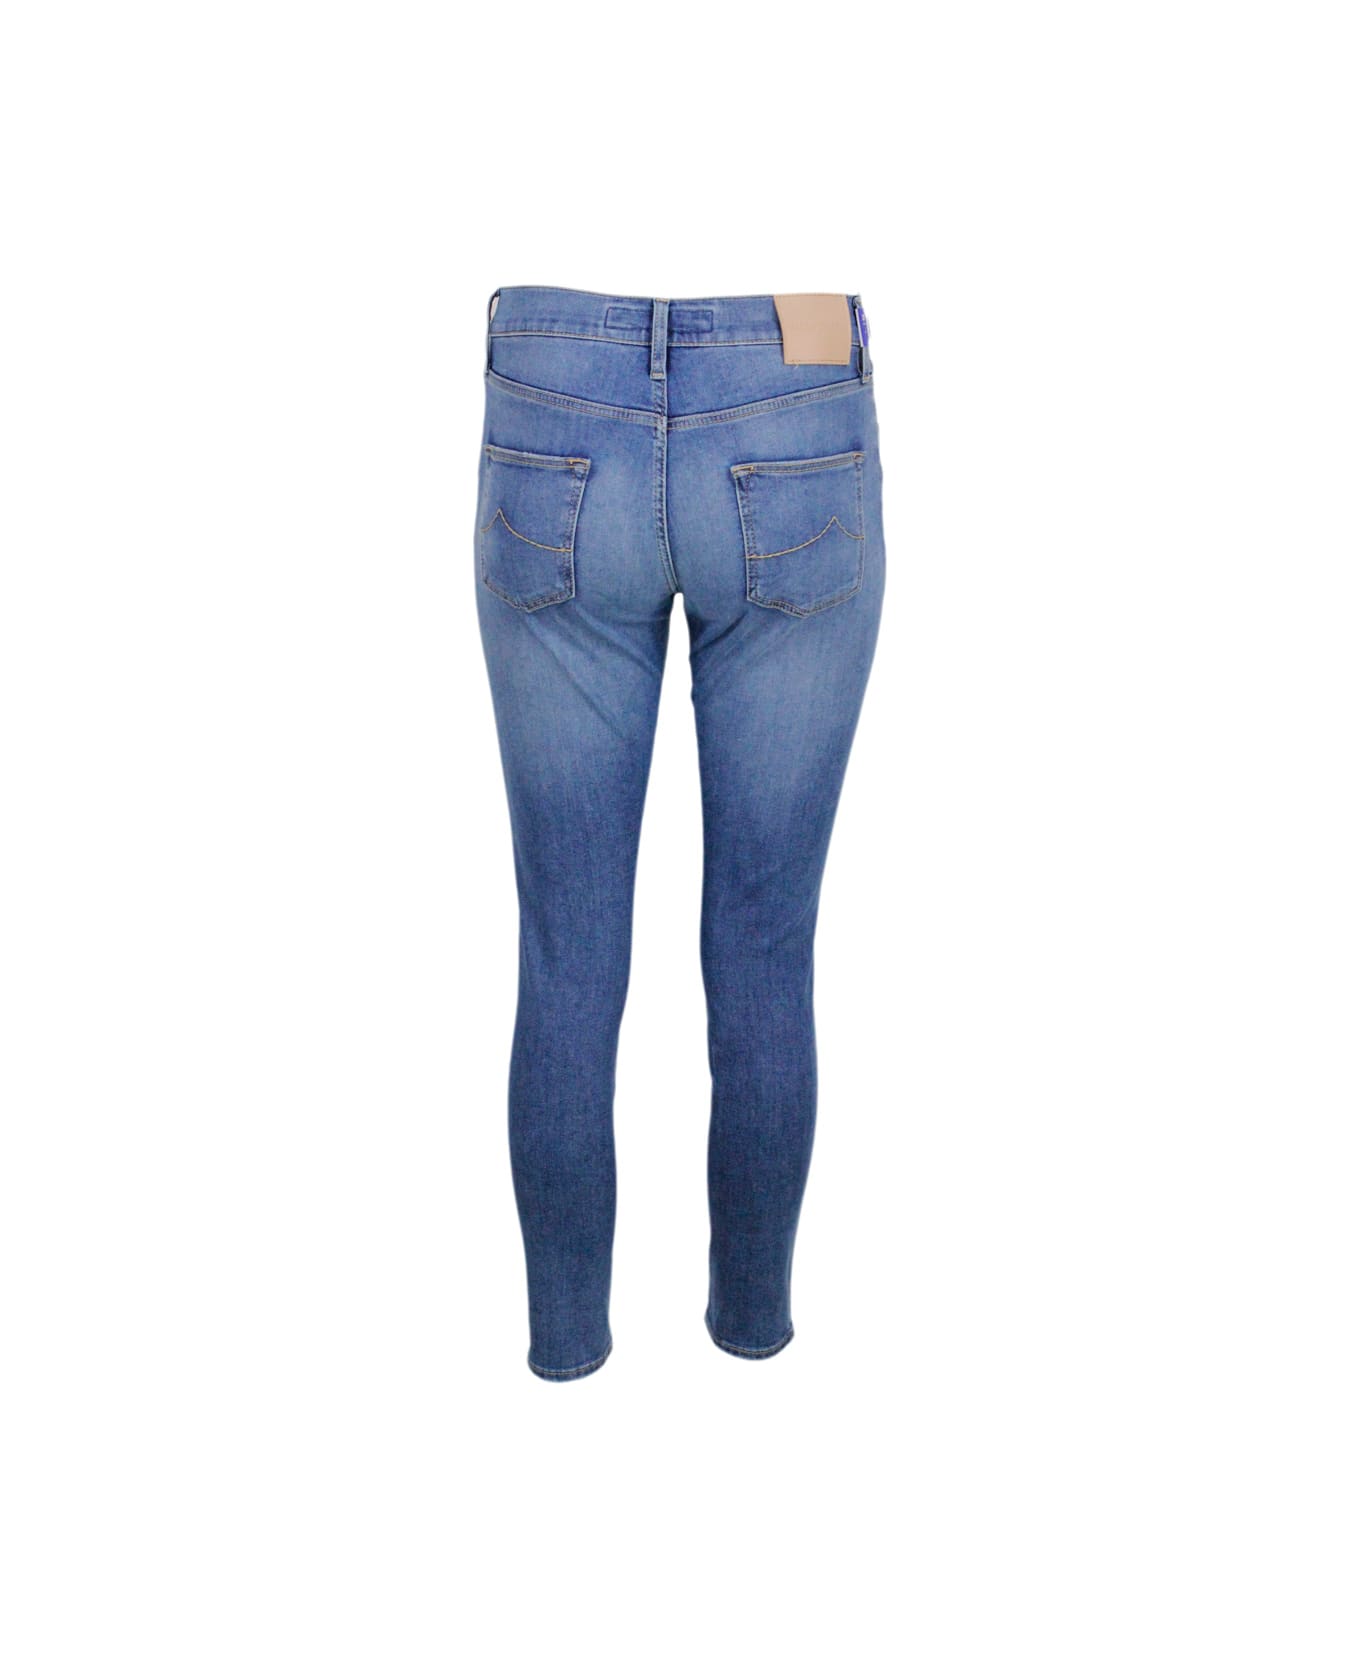 Jacob Cohen Light Jeans In 5-pocket Stretch Denim With Slim Fit At The Ankle With Zip Closure And Tears - Denim